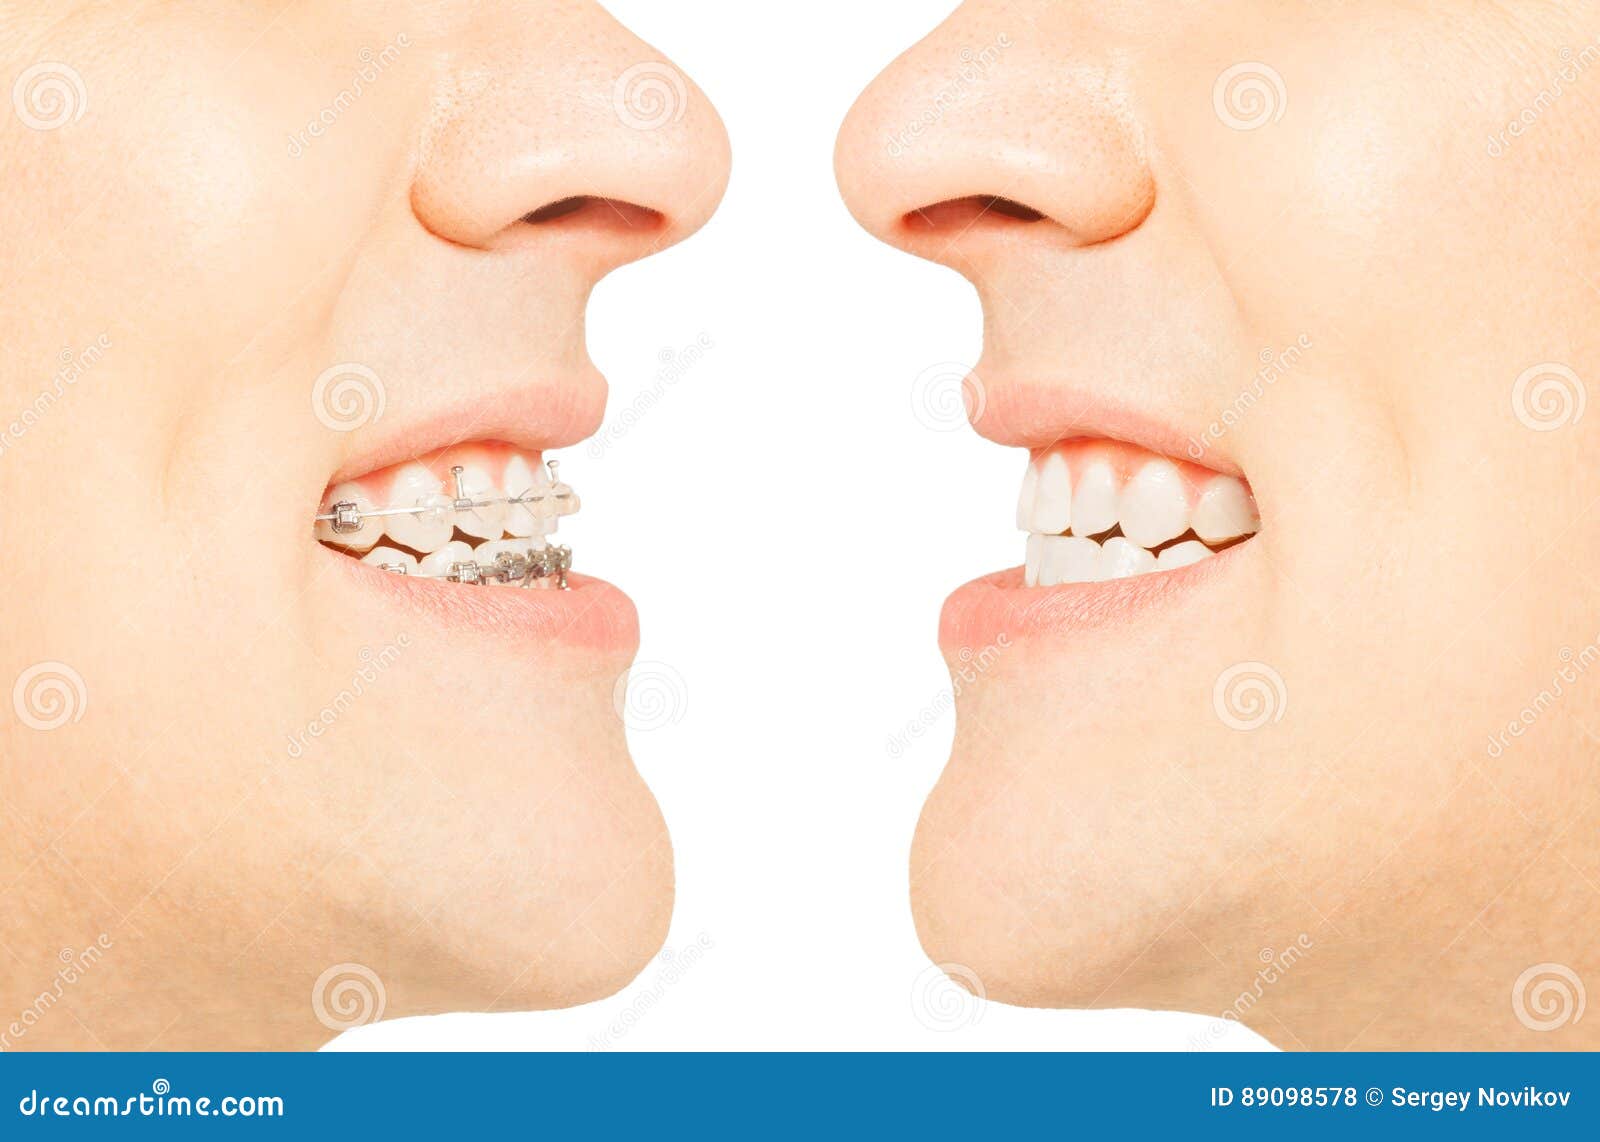 before and after orthodontic treatment with braces